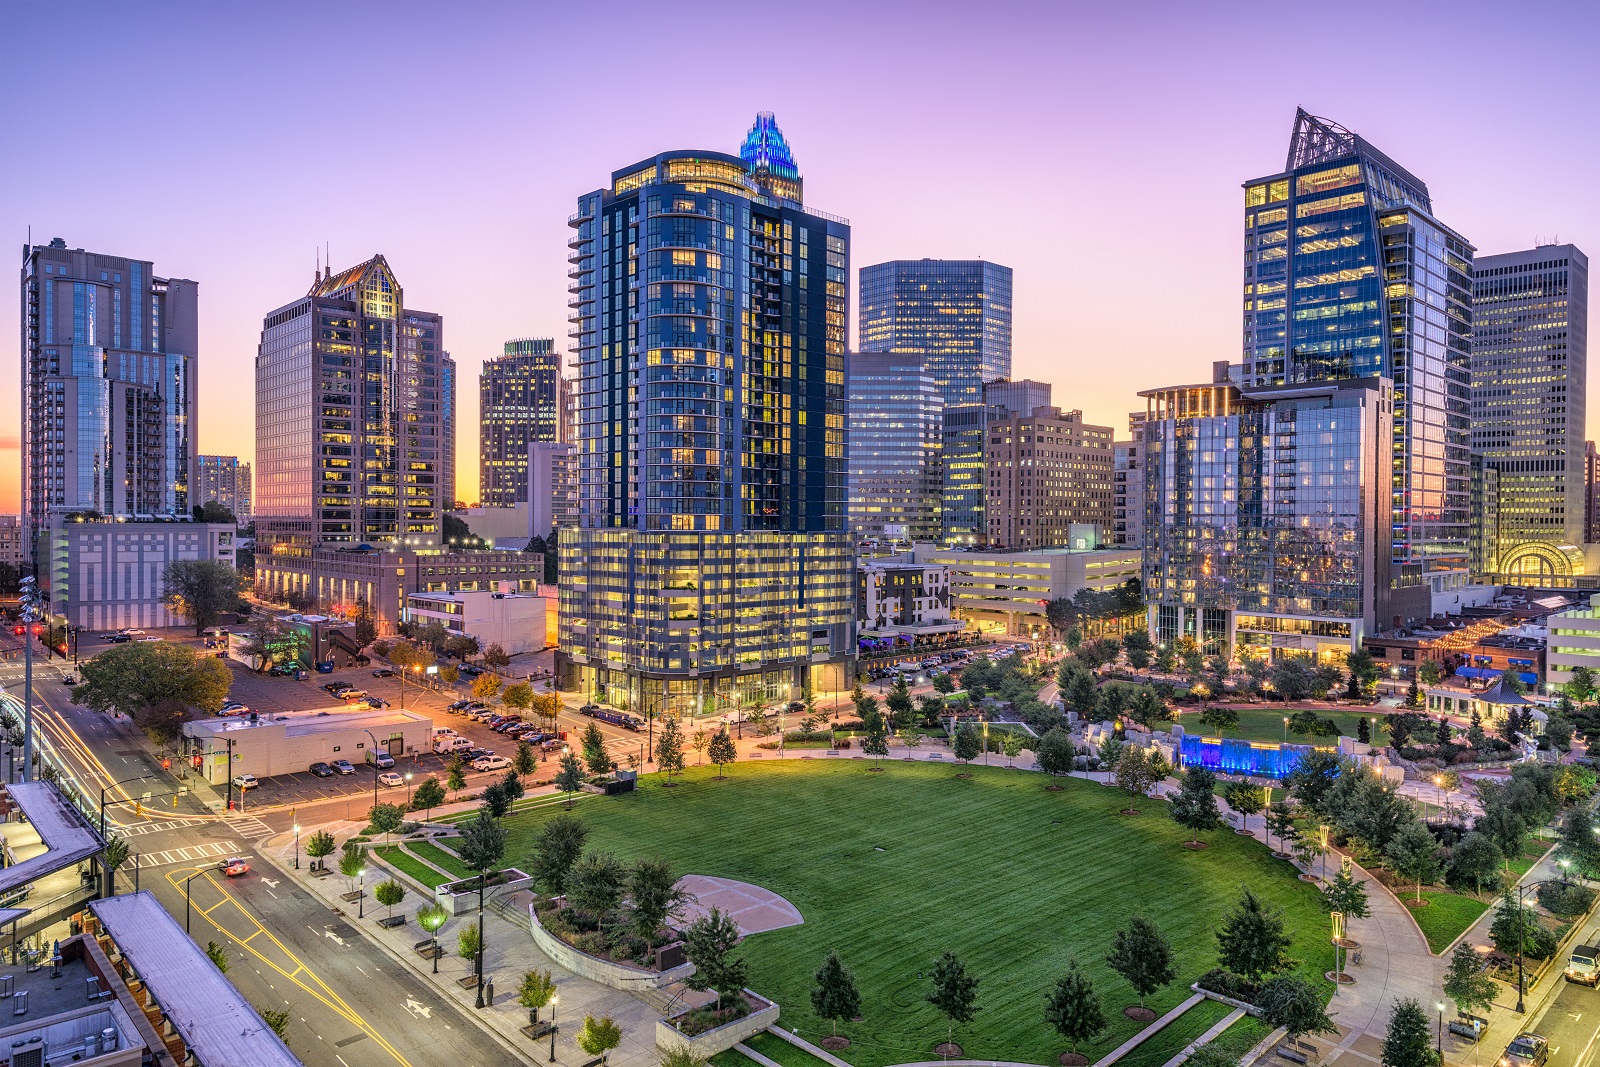 <p class="wp-caption-text">Image Credit: Shutterstock / Sean Pavone</p>  <p><span>Charlotte boasts an efficient street grid and relatively low congestion outside of rush hours, making car travel straightforward and stress-free.</span></p>